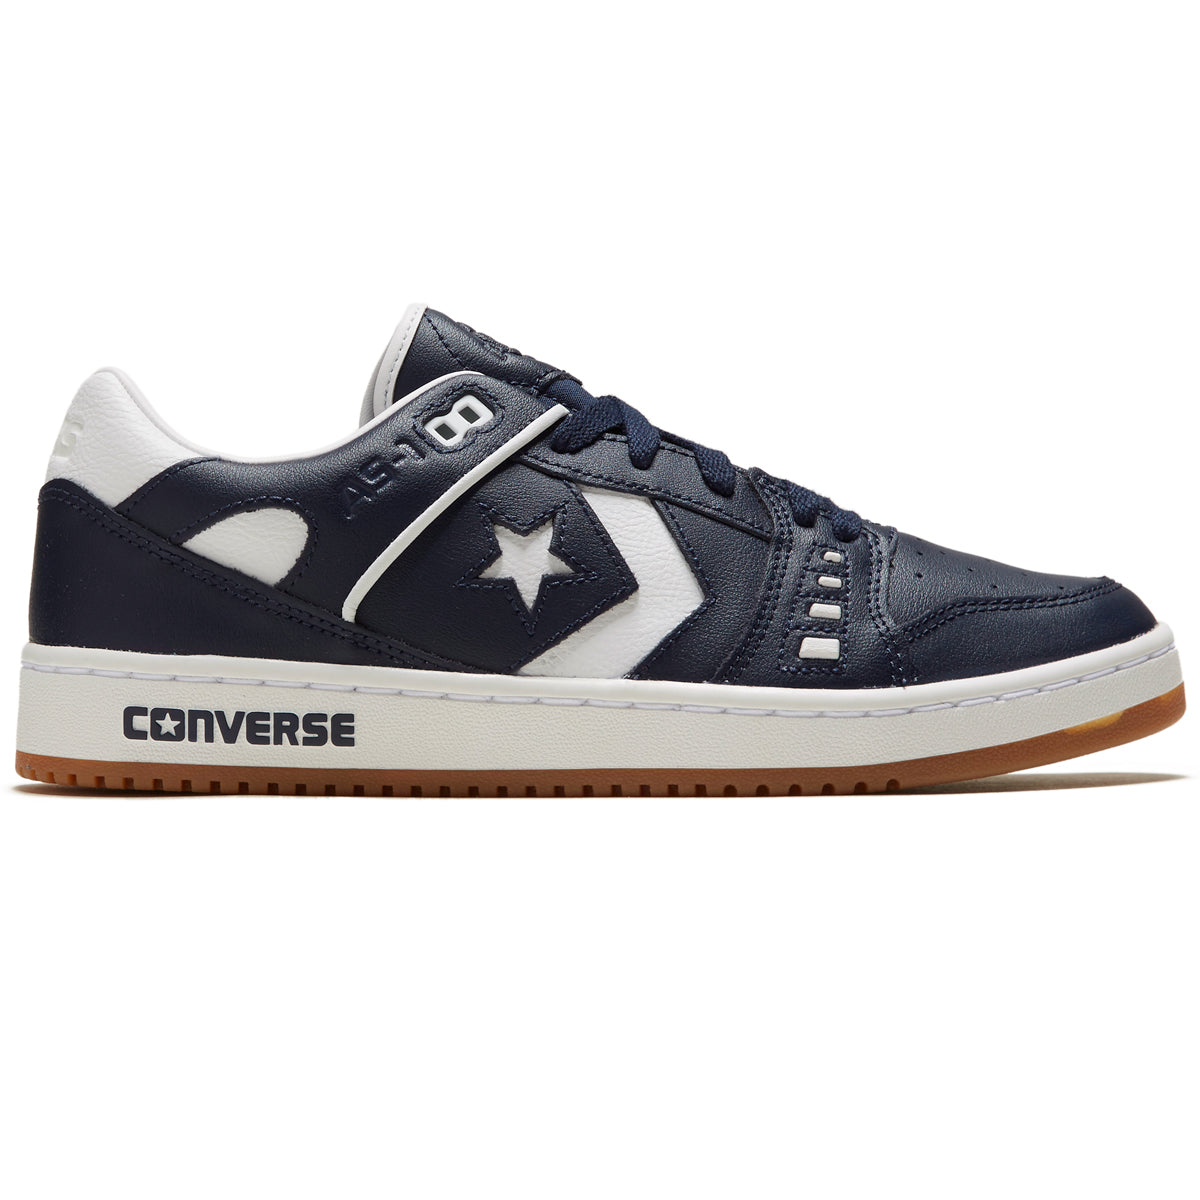 Converse AS-1 Pro Shoes - Obsidian/White/Gum image 1